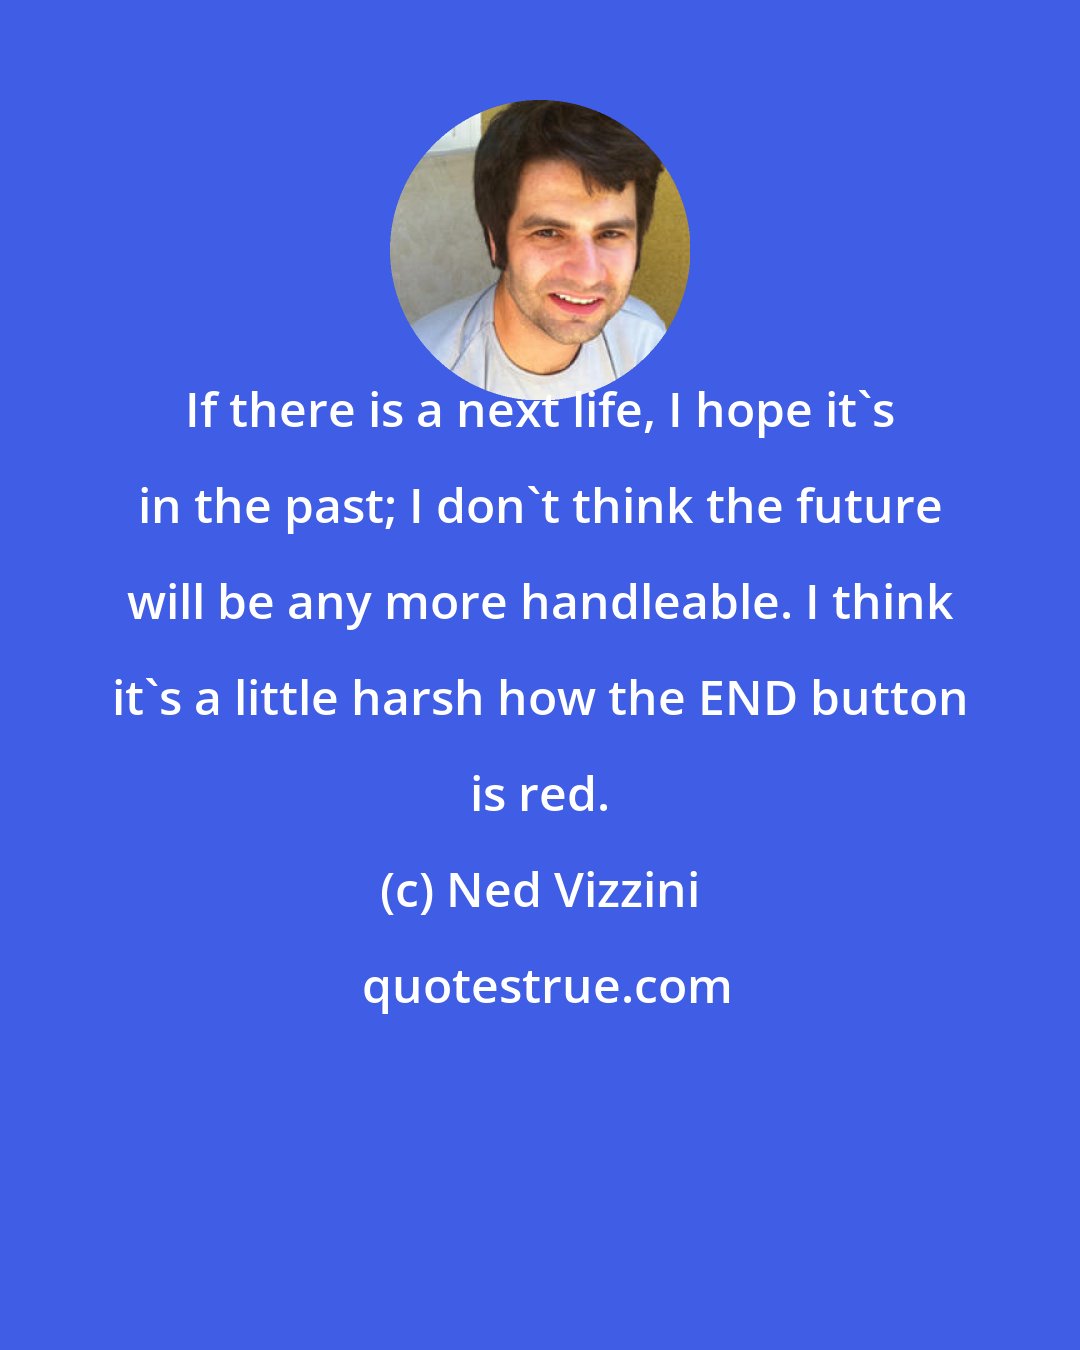 Ned Vizzini: If there is a next life, I hope it's in the past; I don't think the future will be any more handleable. I think it's a little harsh how the END button is red.